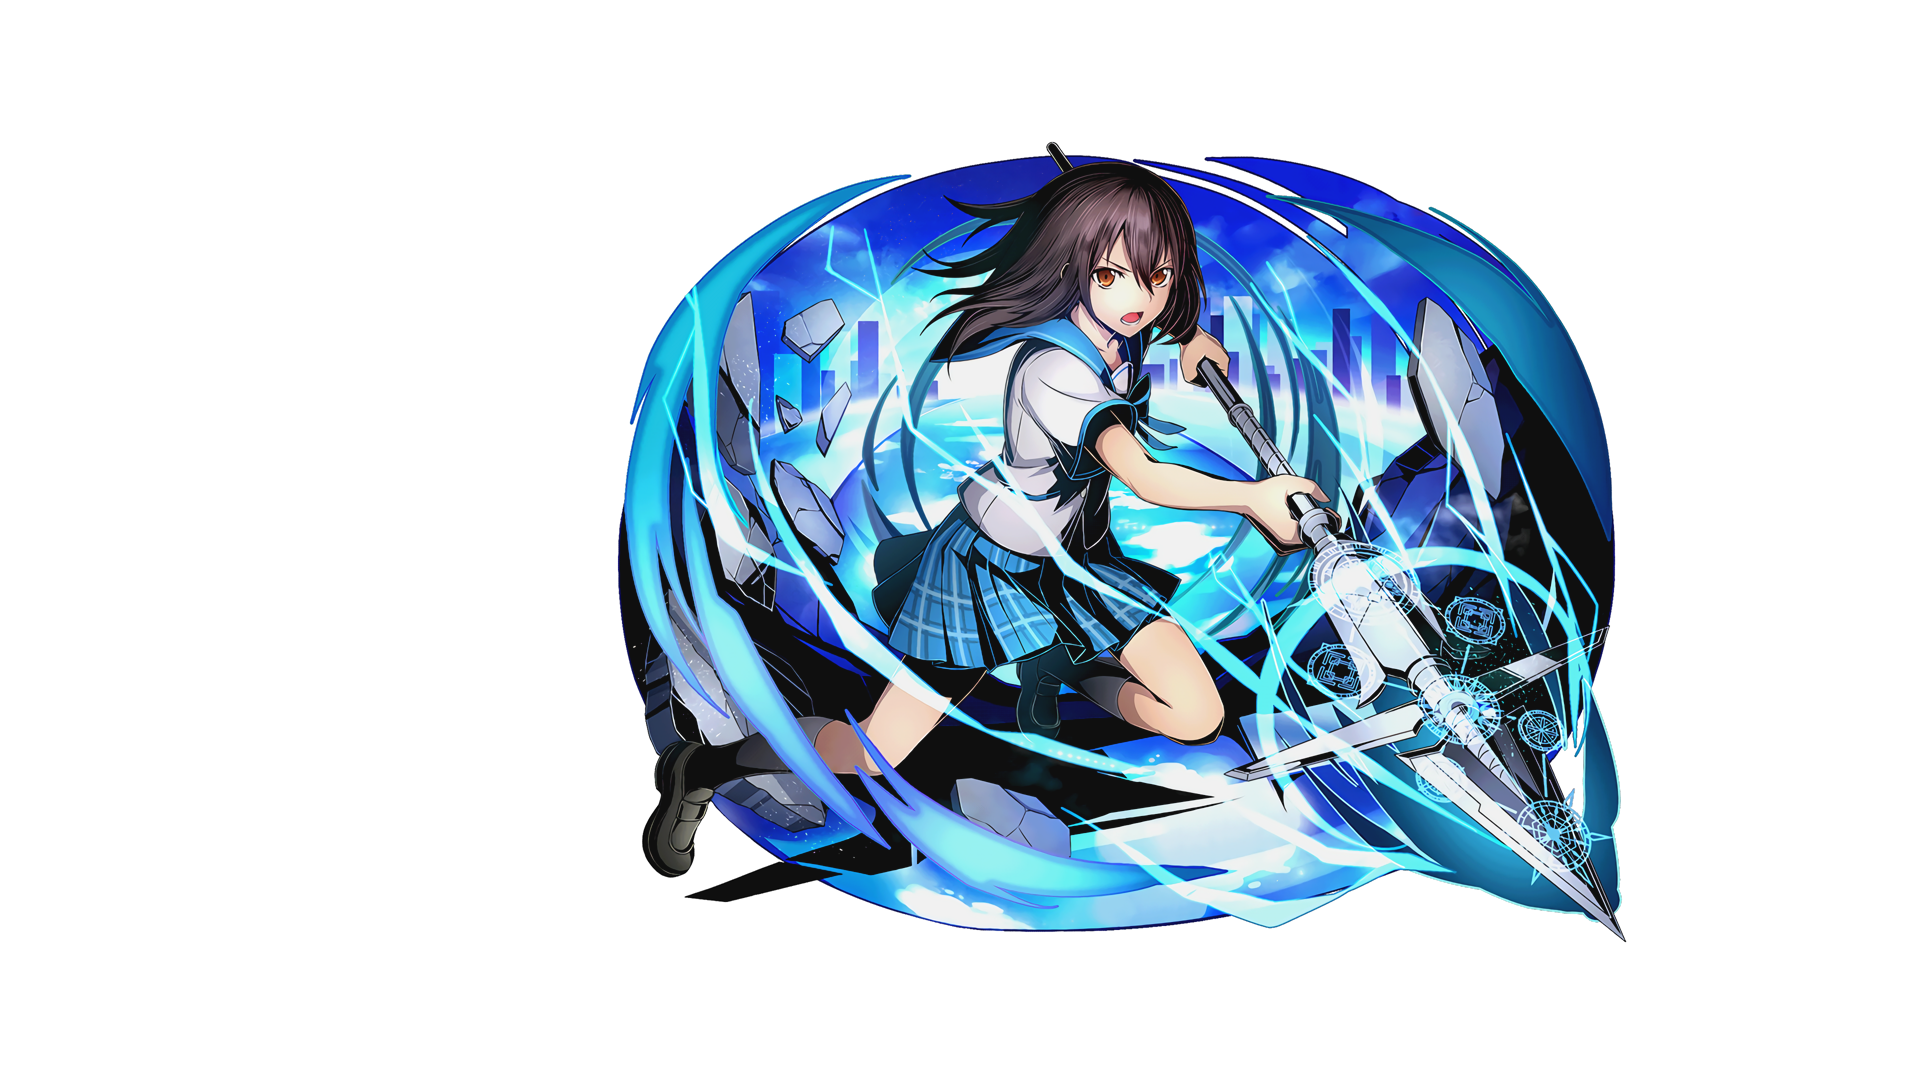 Anime Strike the Blood HD Wallpaper Background Image.